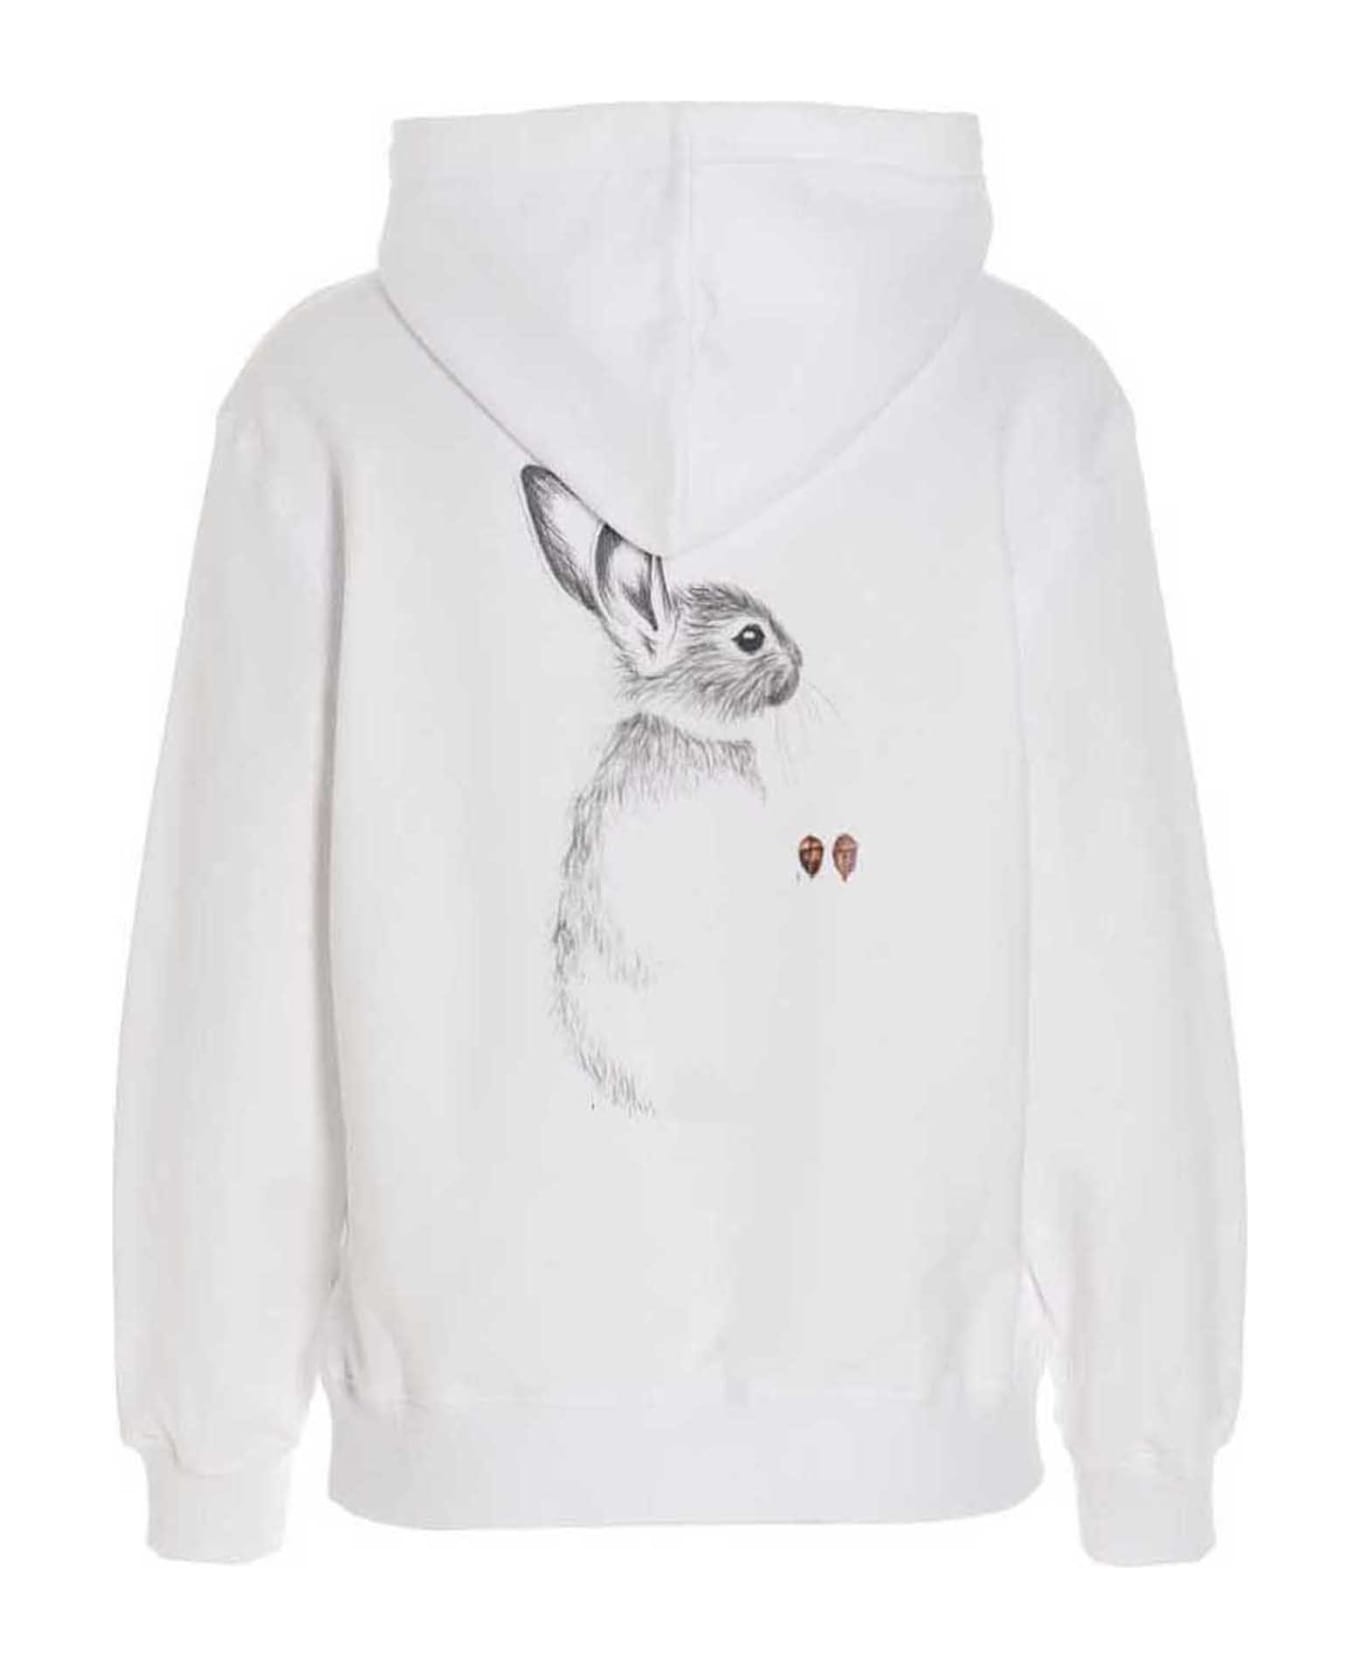 Lanvin Print Embroidery Hoodie - White